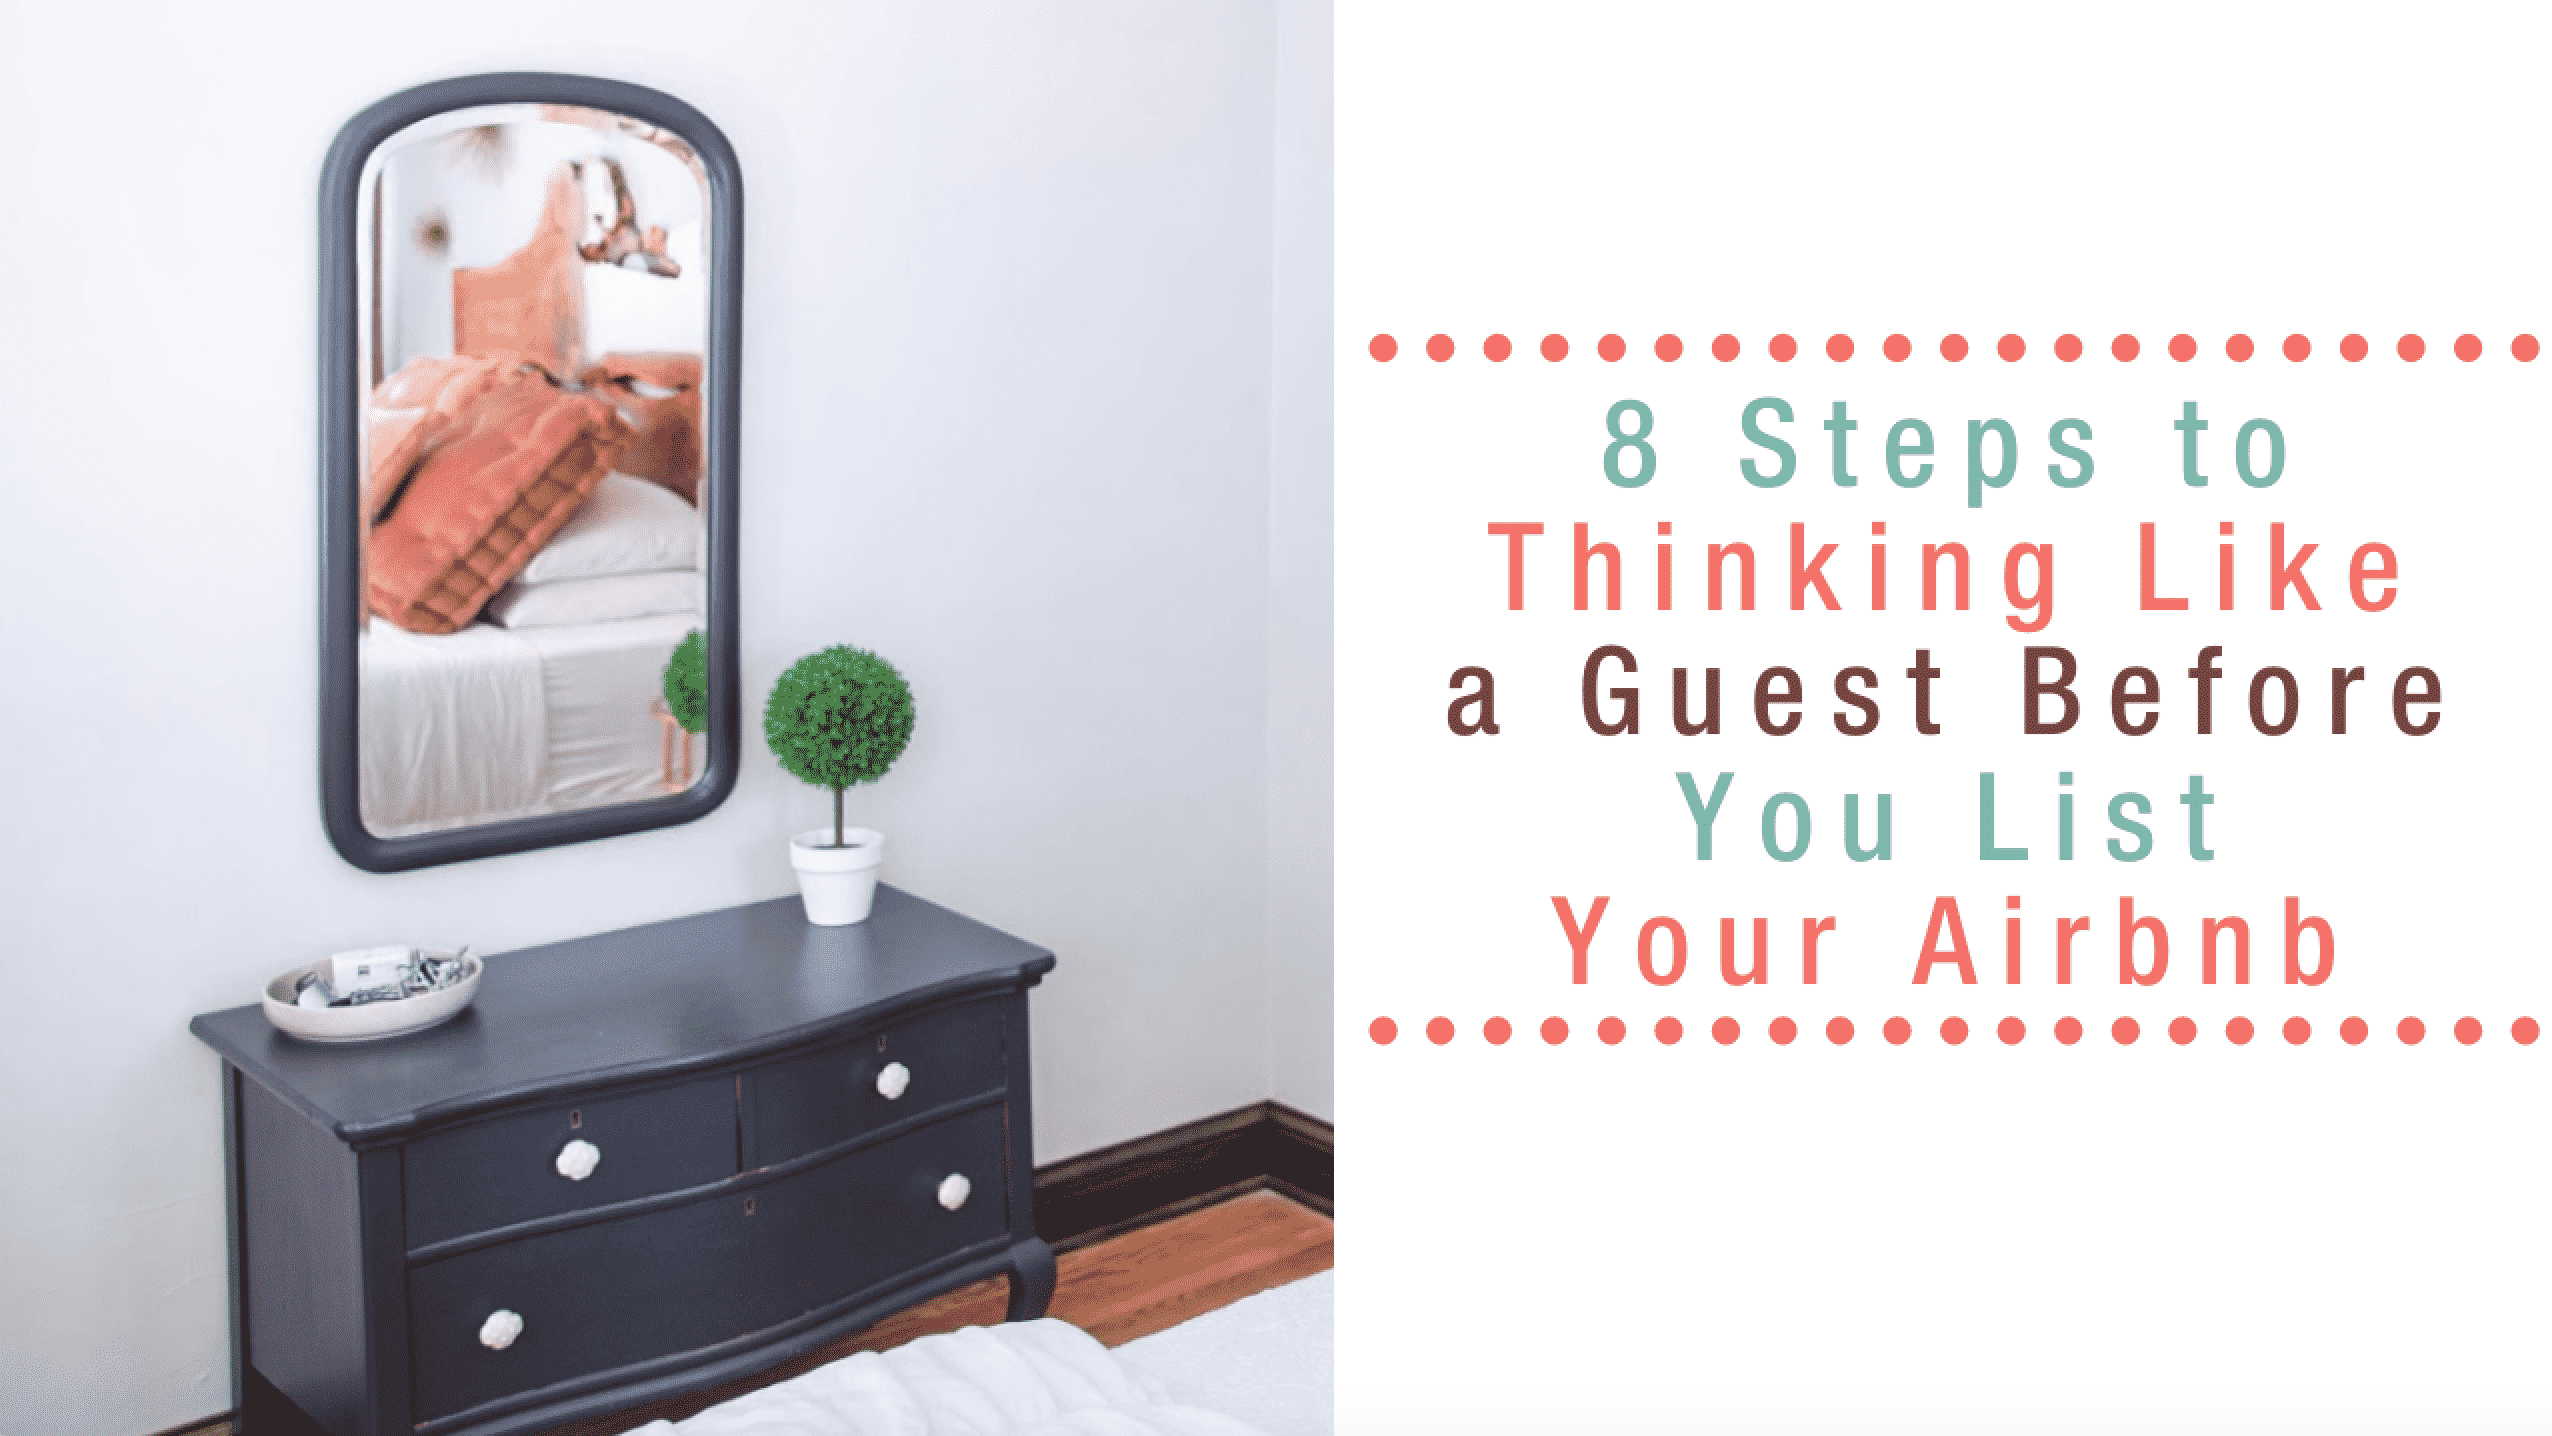 8_Steps_to_Thinking_Like_a_Guest_Before_You_List_Your_Airbnb